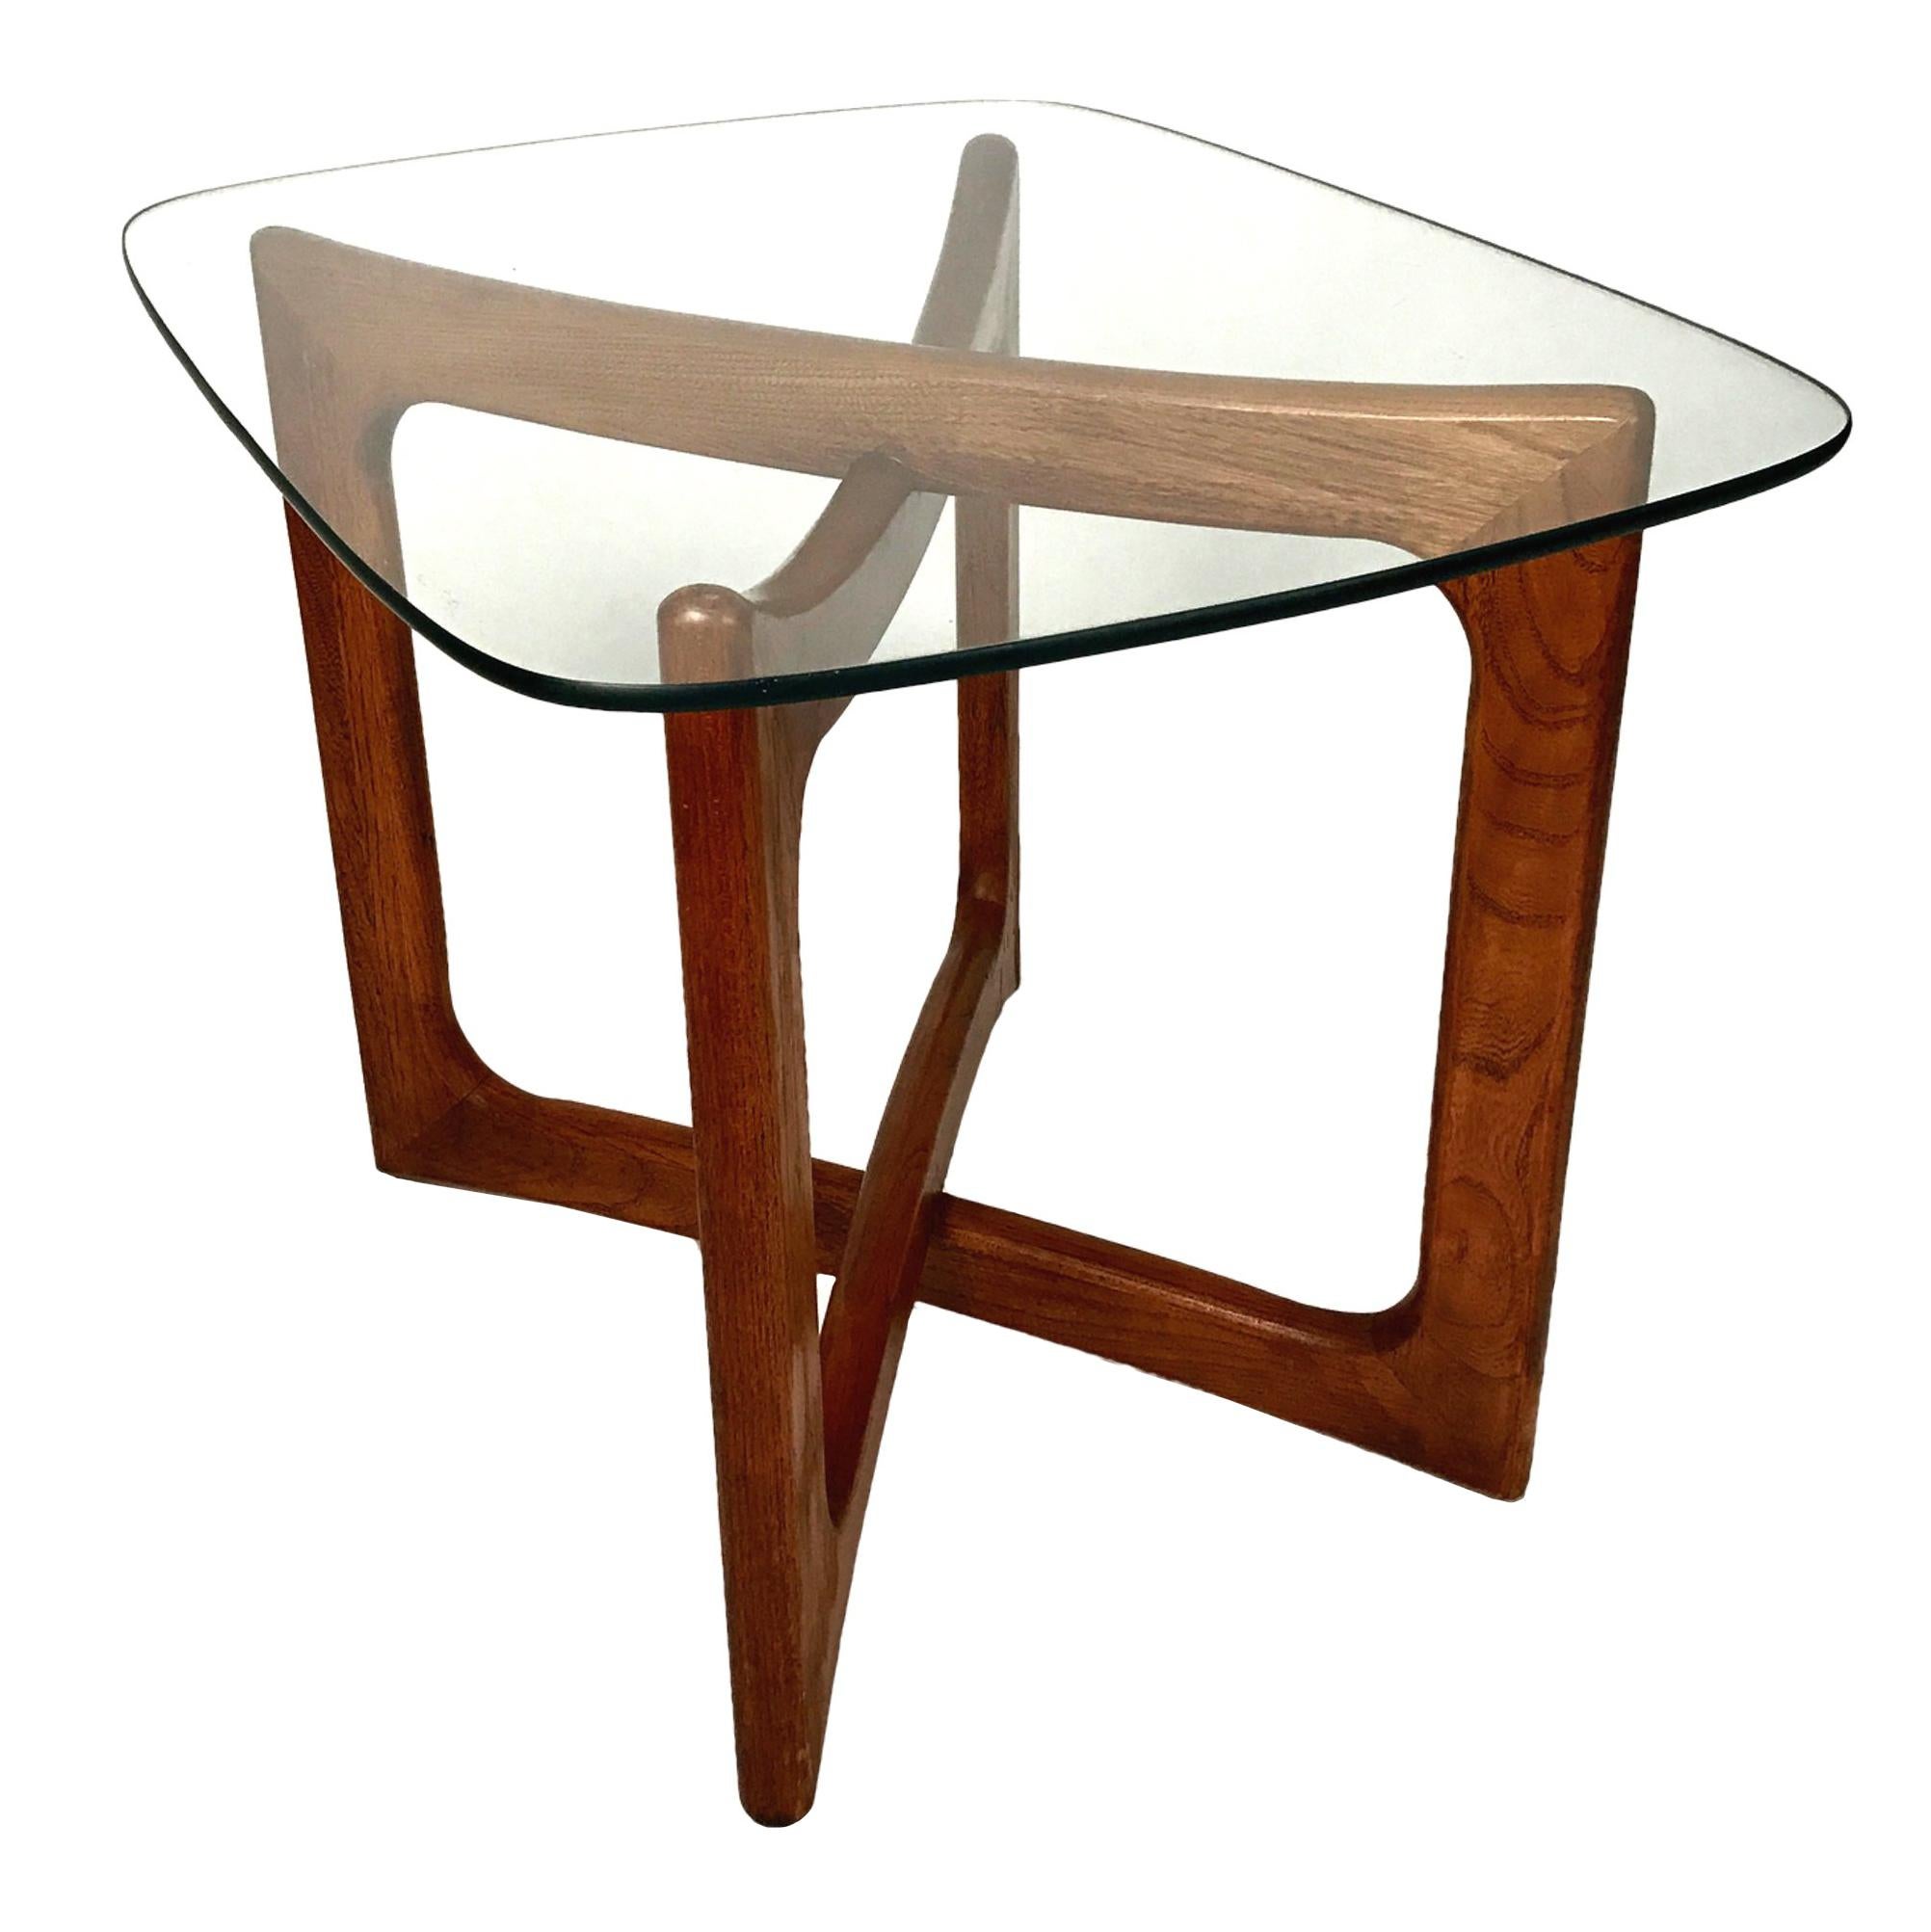 Sculptural X-Base Adrian Pearsall for Craft Associates Walnut and Glass Table